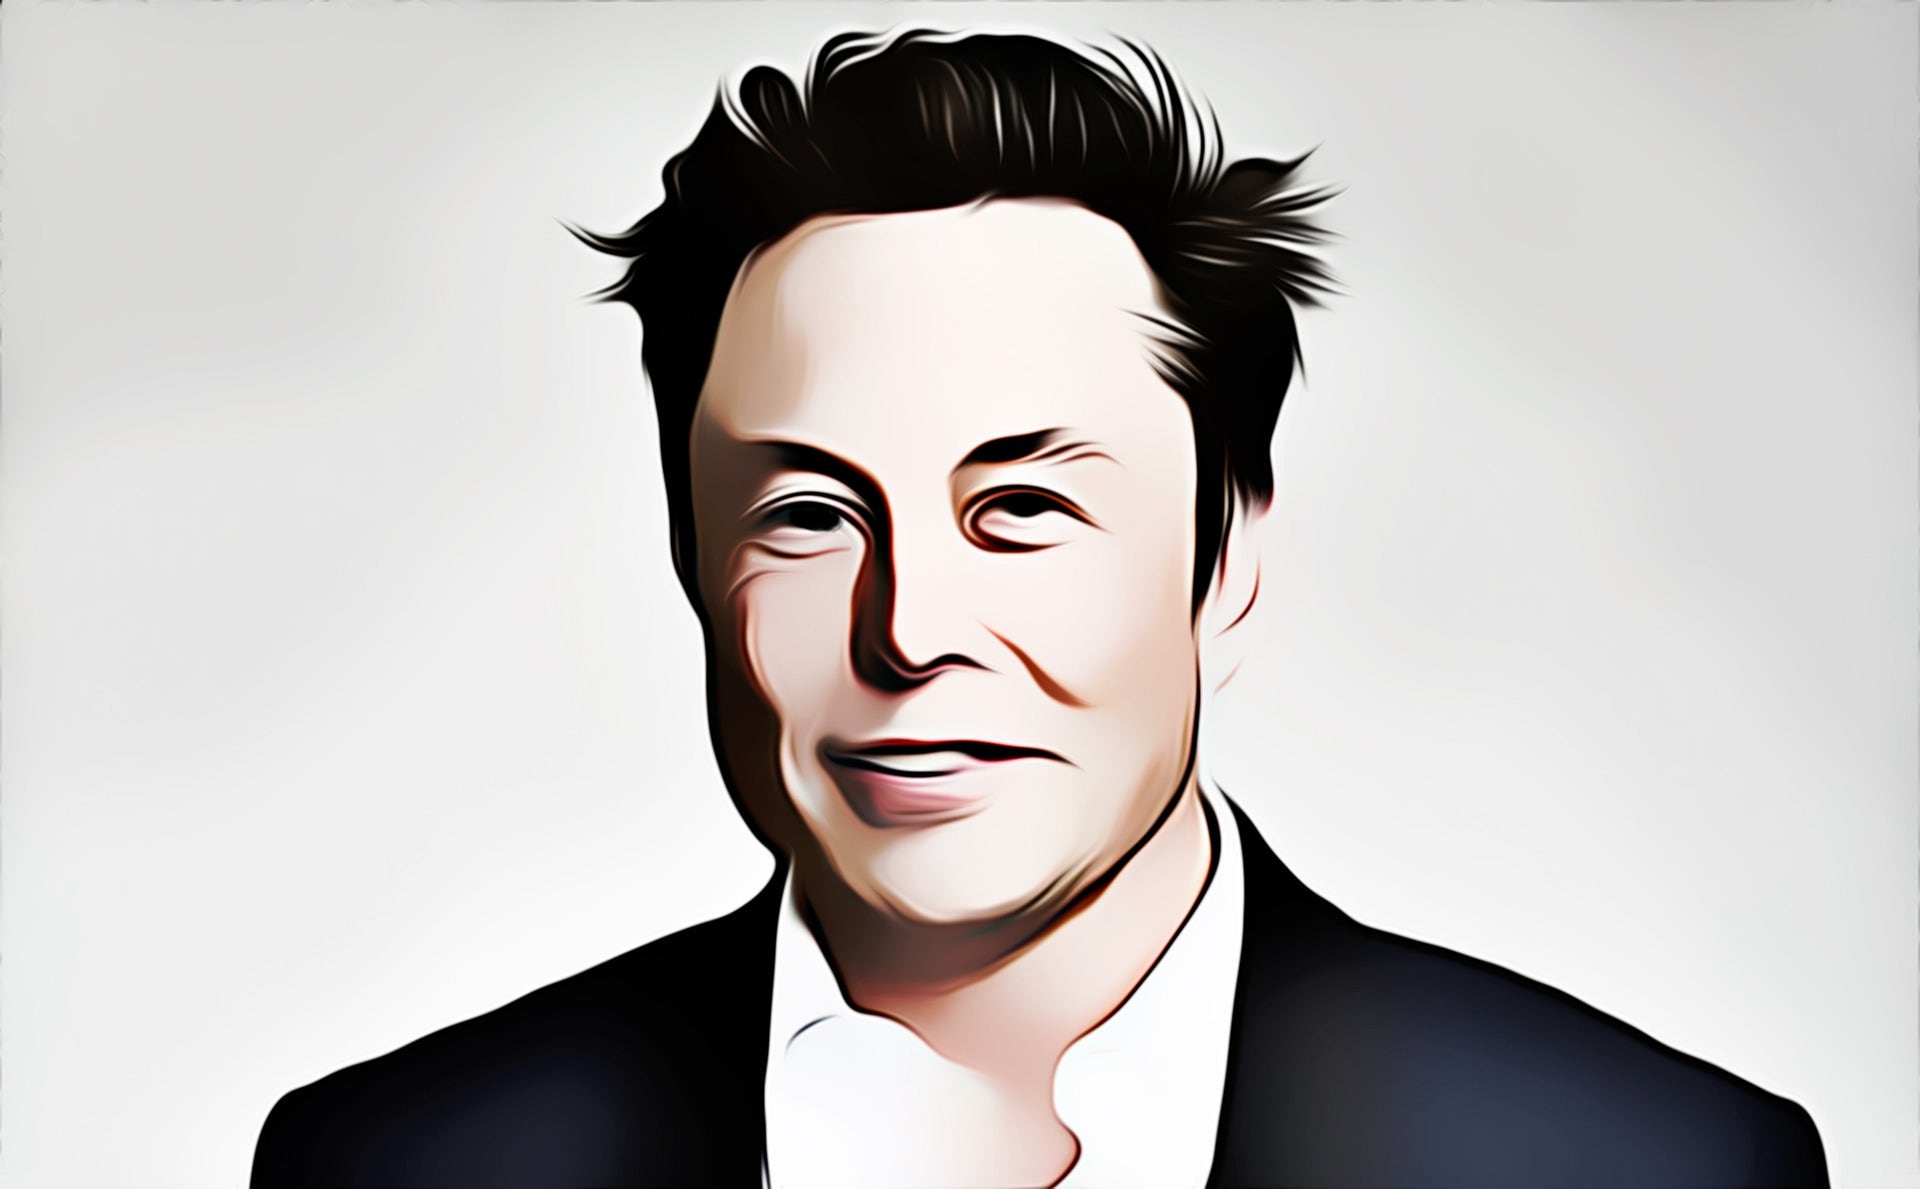 Tesla CEO Elon Musk Proposes Selling 10% Of His Company Stock, He's Asking Twitter Followers To Decide